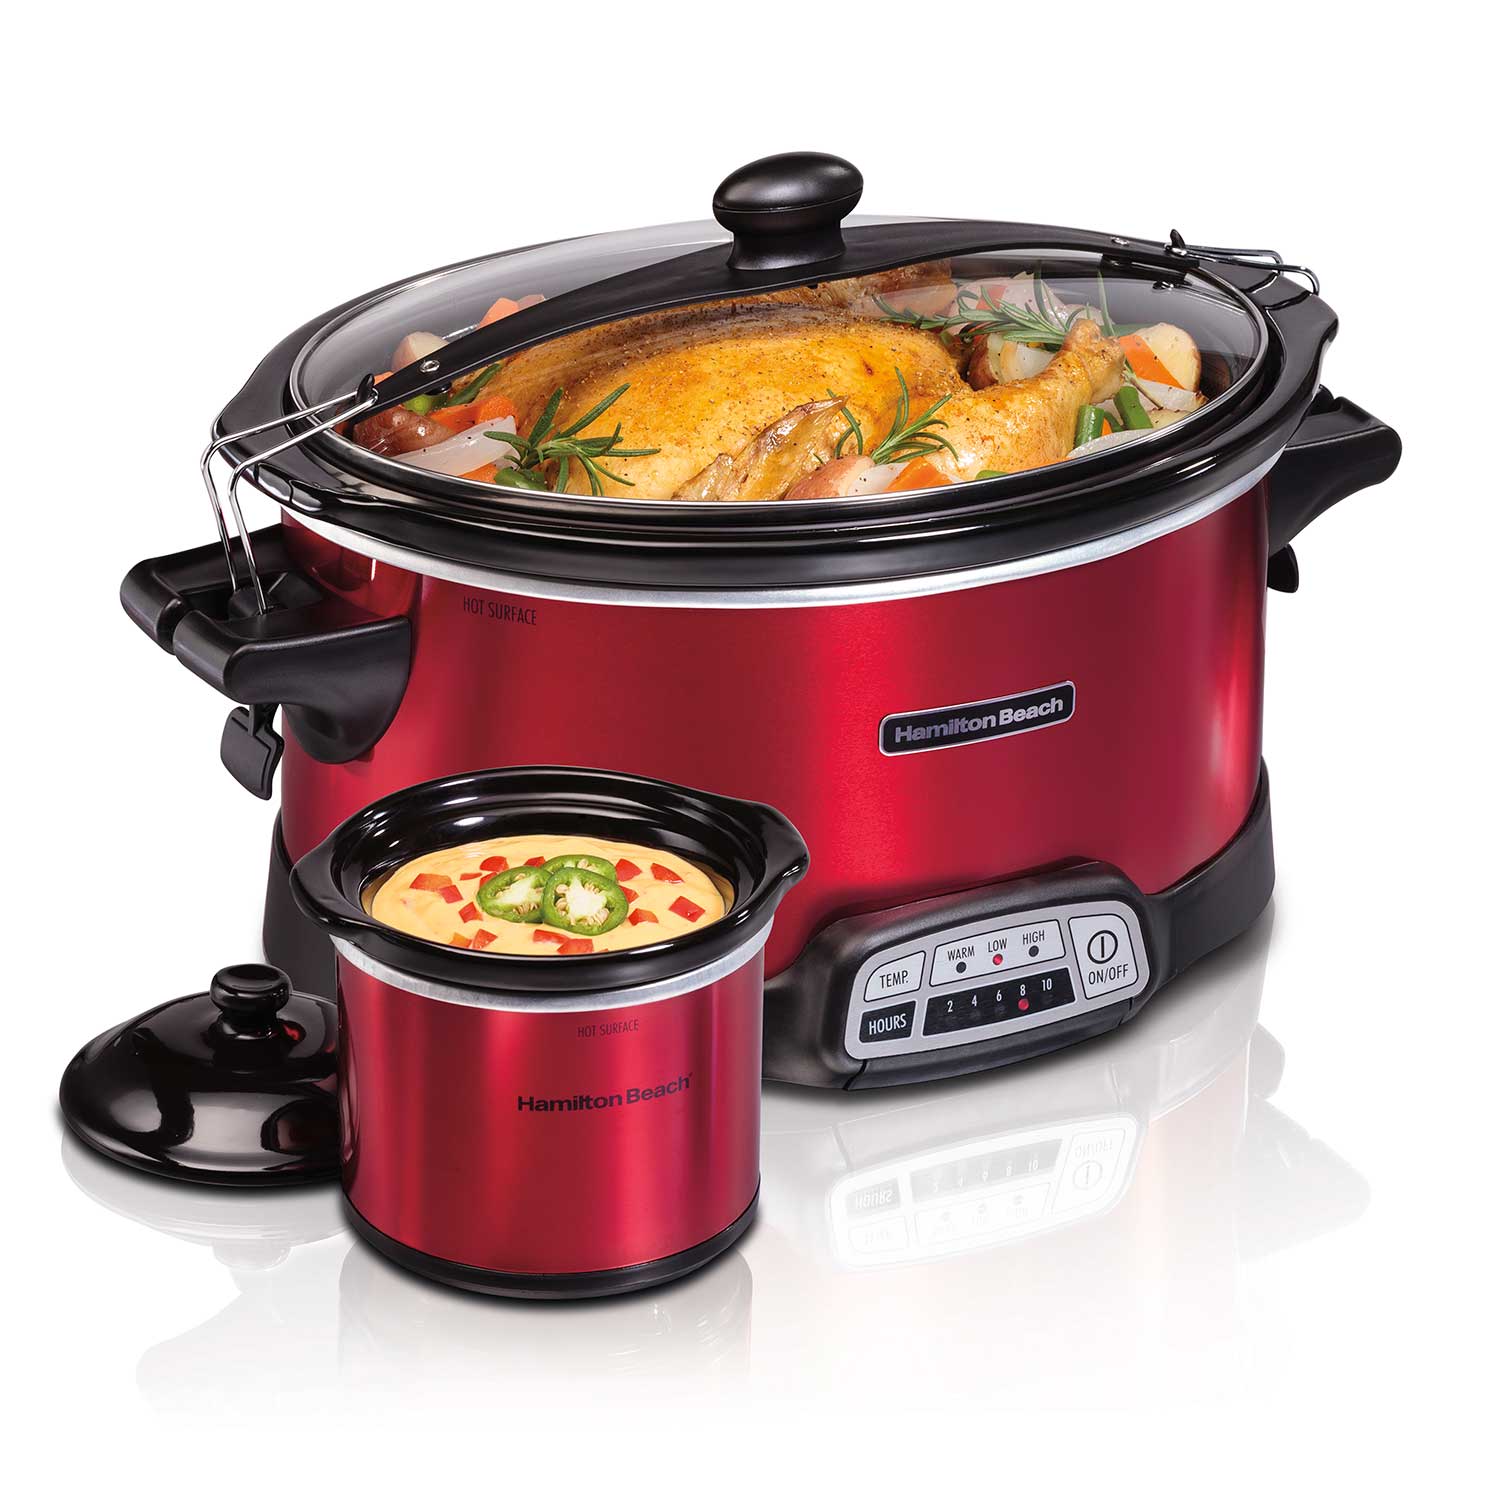 Stay or Go® Programmable Slow Cooker with Party Dipper, Red (33478)